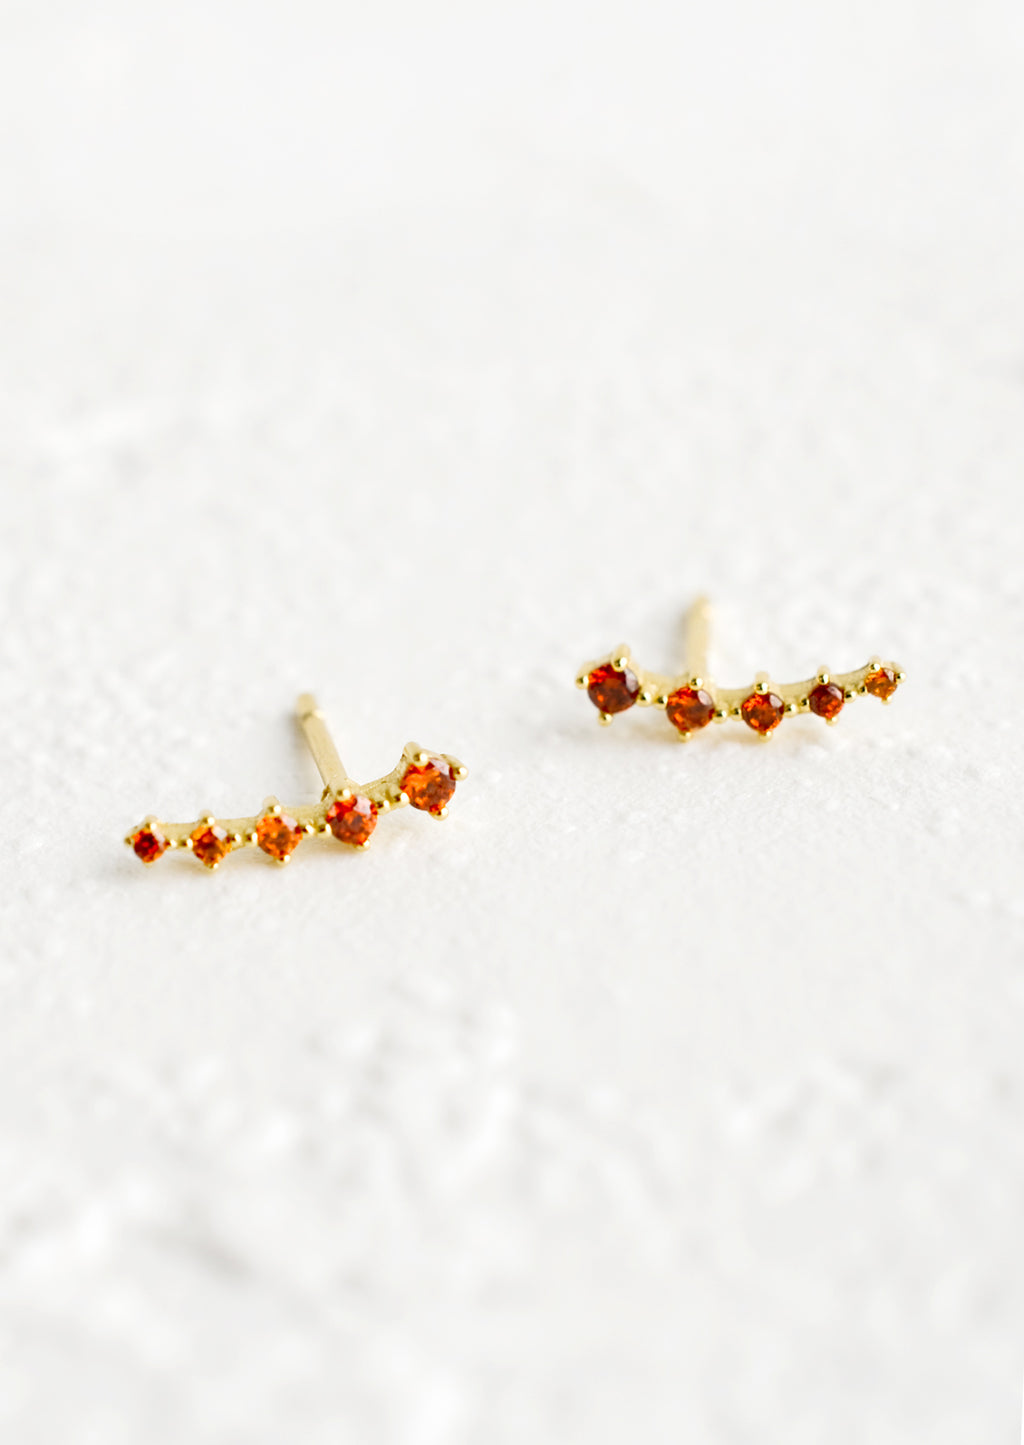 Amber: Stud earrings with amber crystals in incremental sizes, designed to climb up the ear